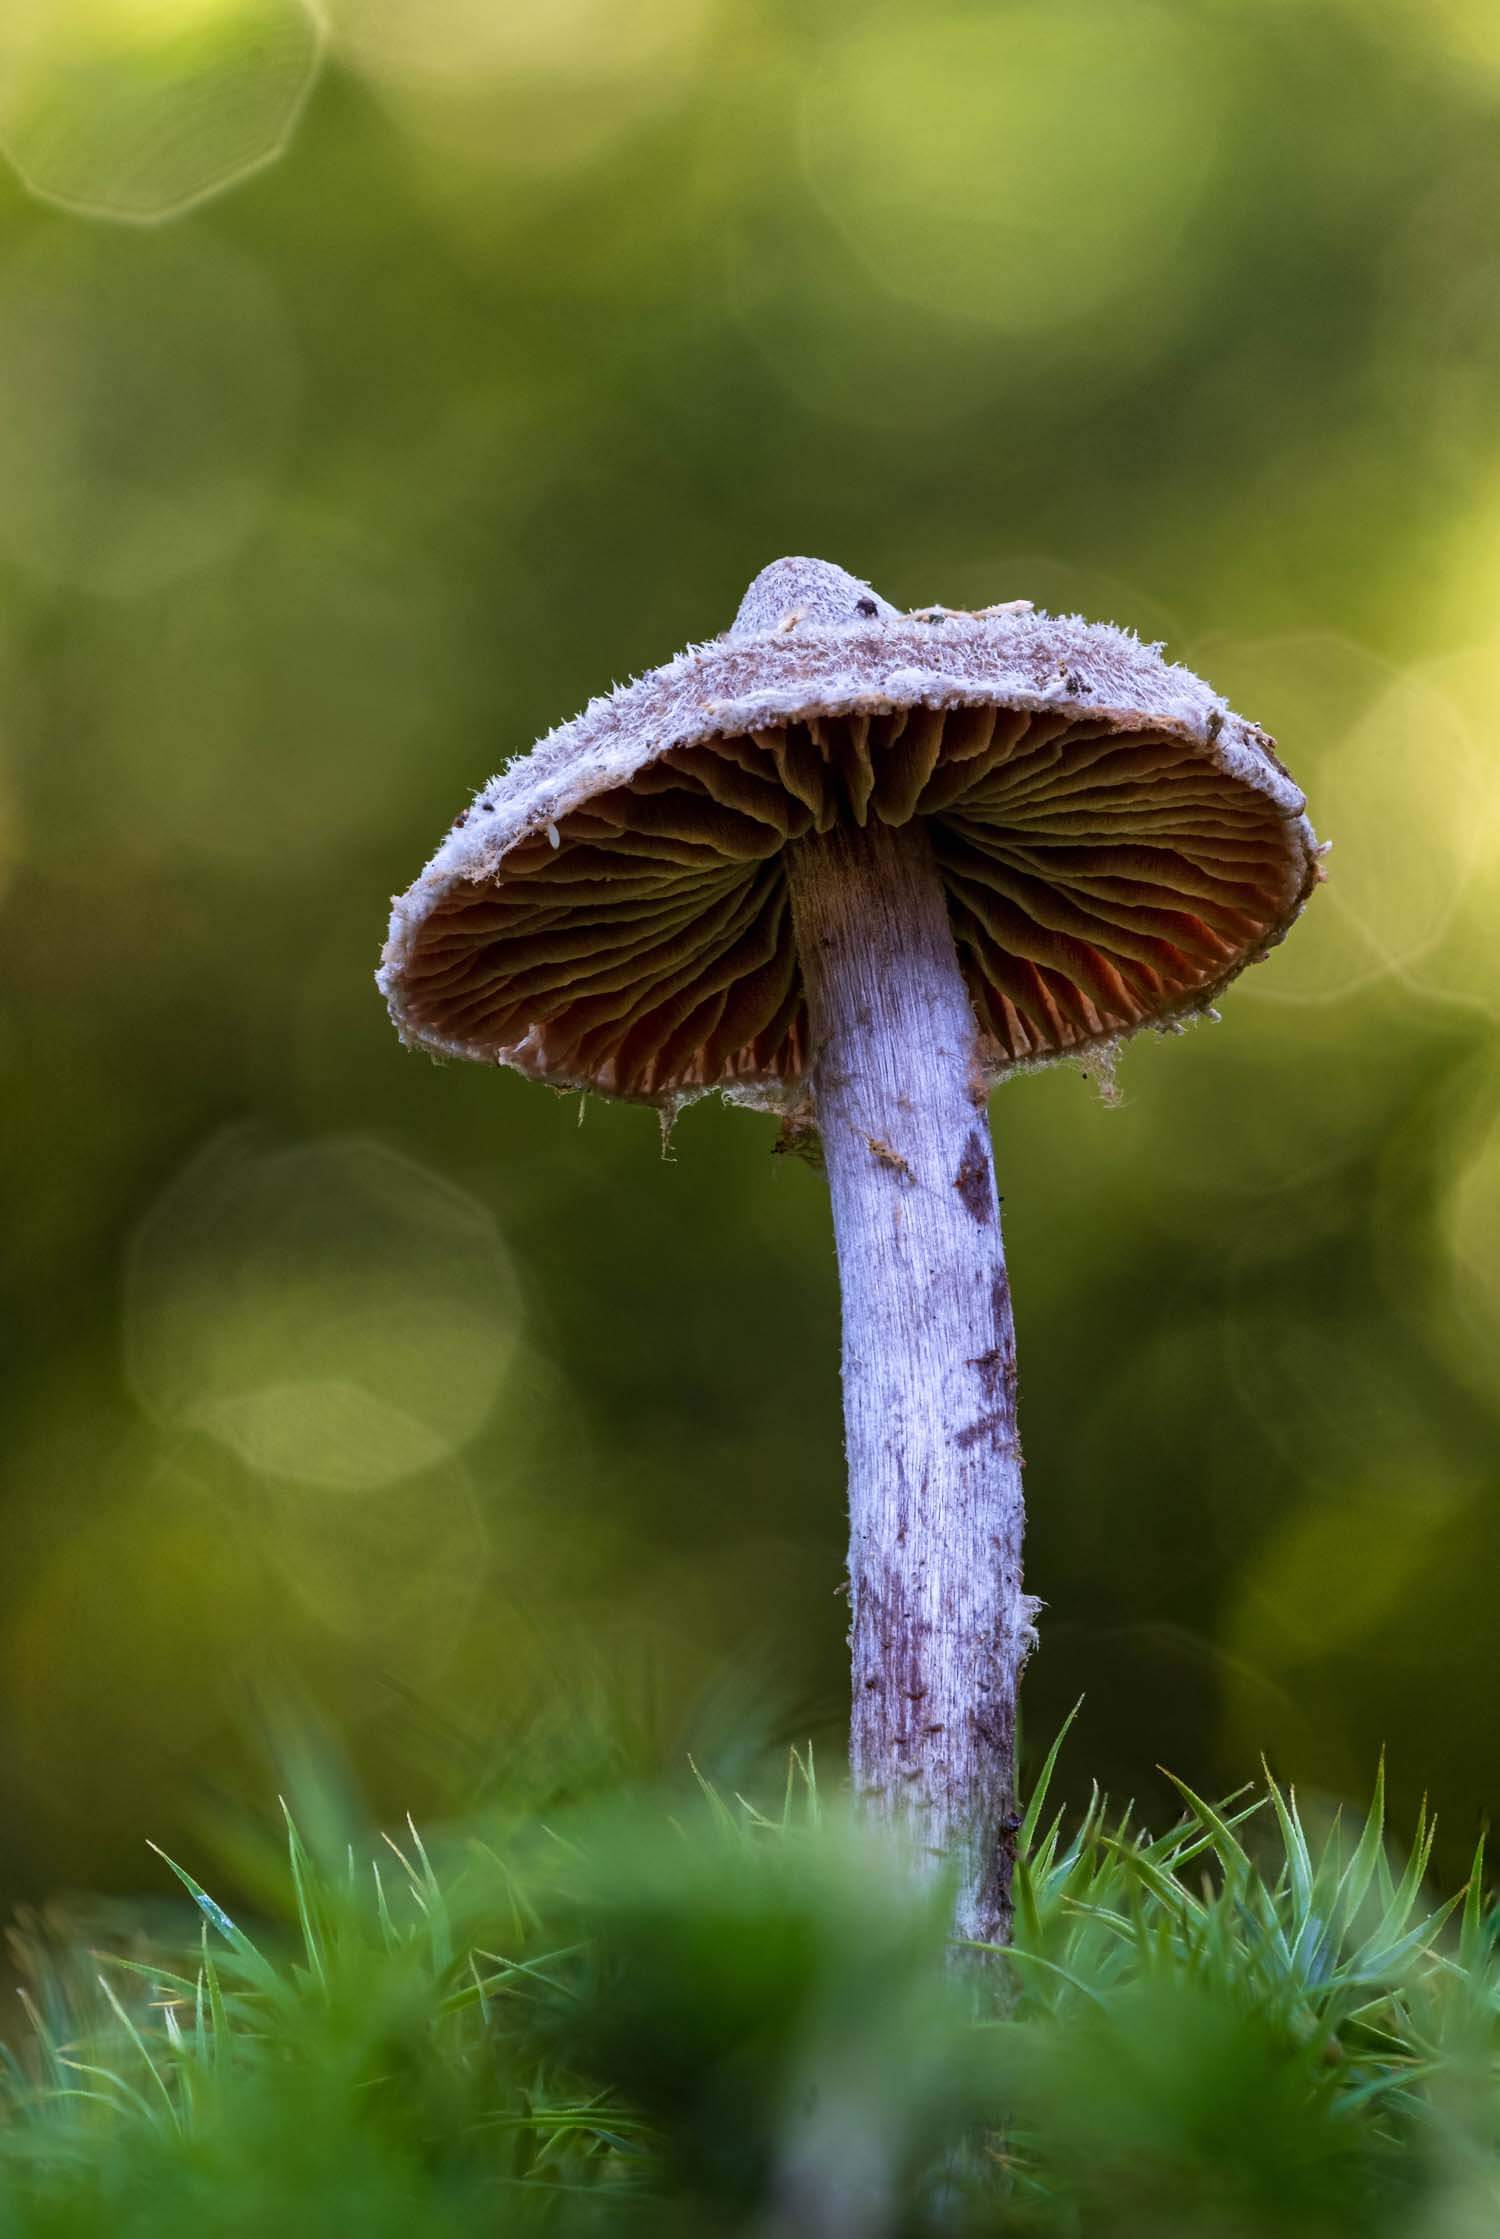 Furry mushroom with visible gills seen from low angle against blurred, green woodland background